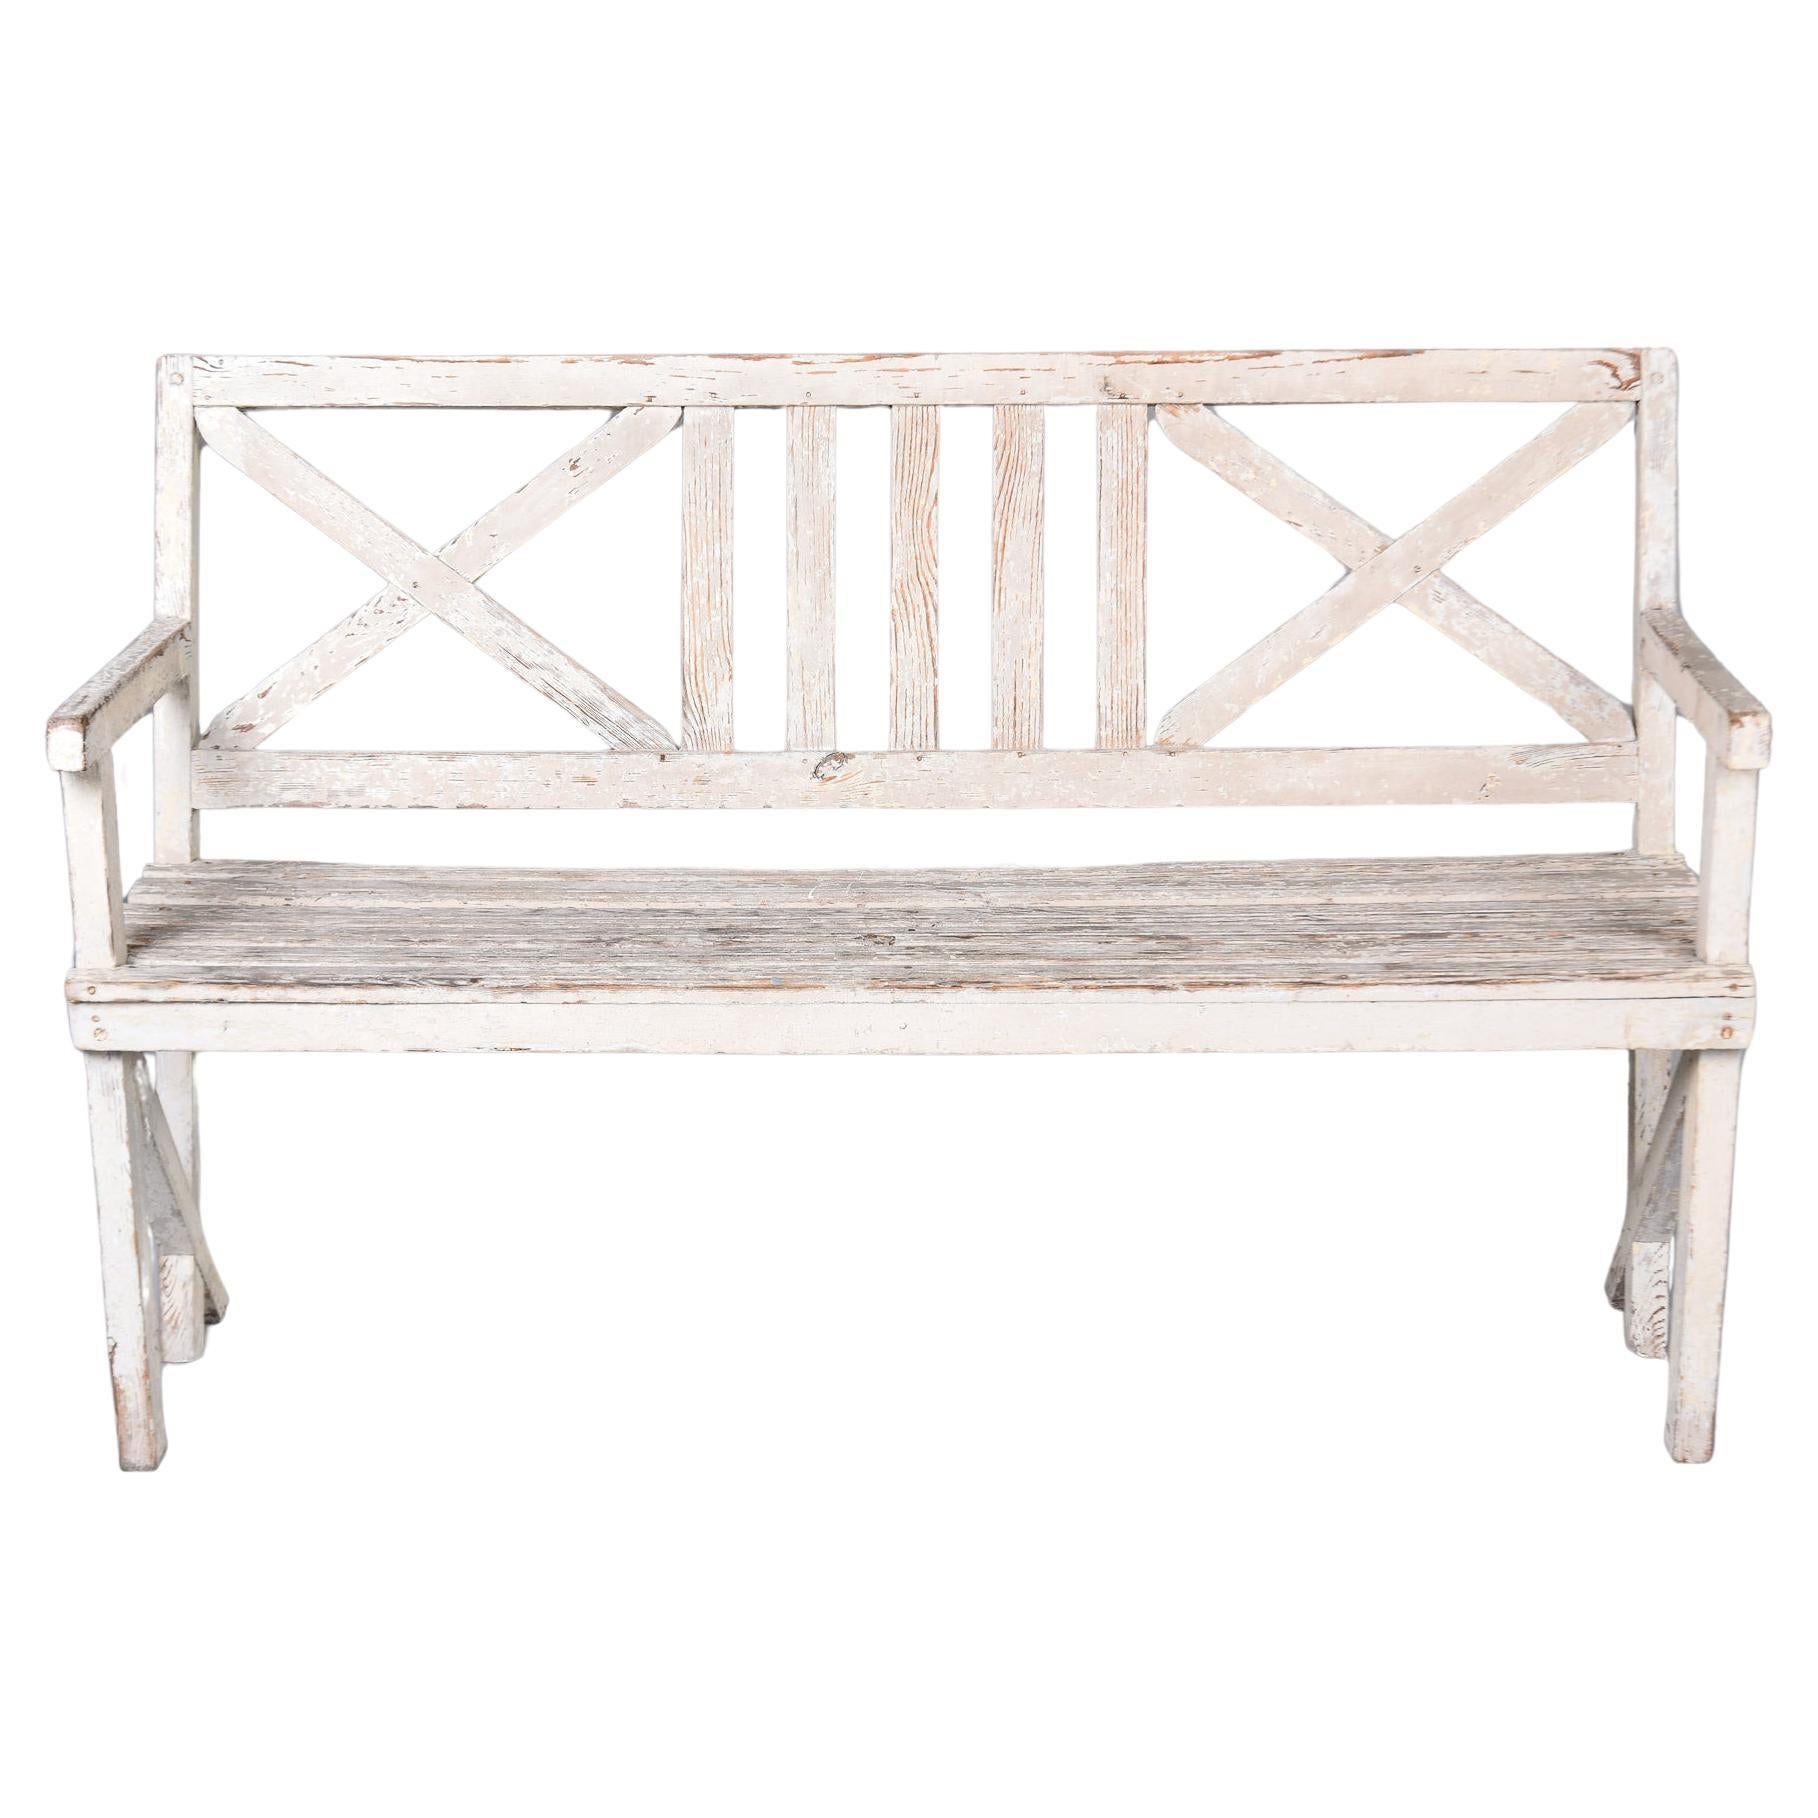 Antique English Painted Wood Bench with Cross Accented Back For Sale